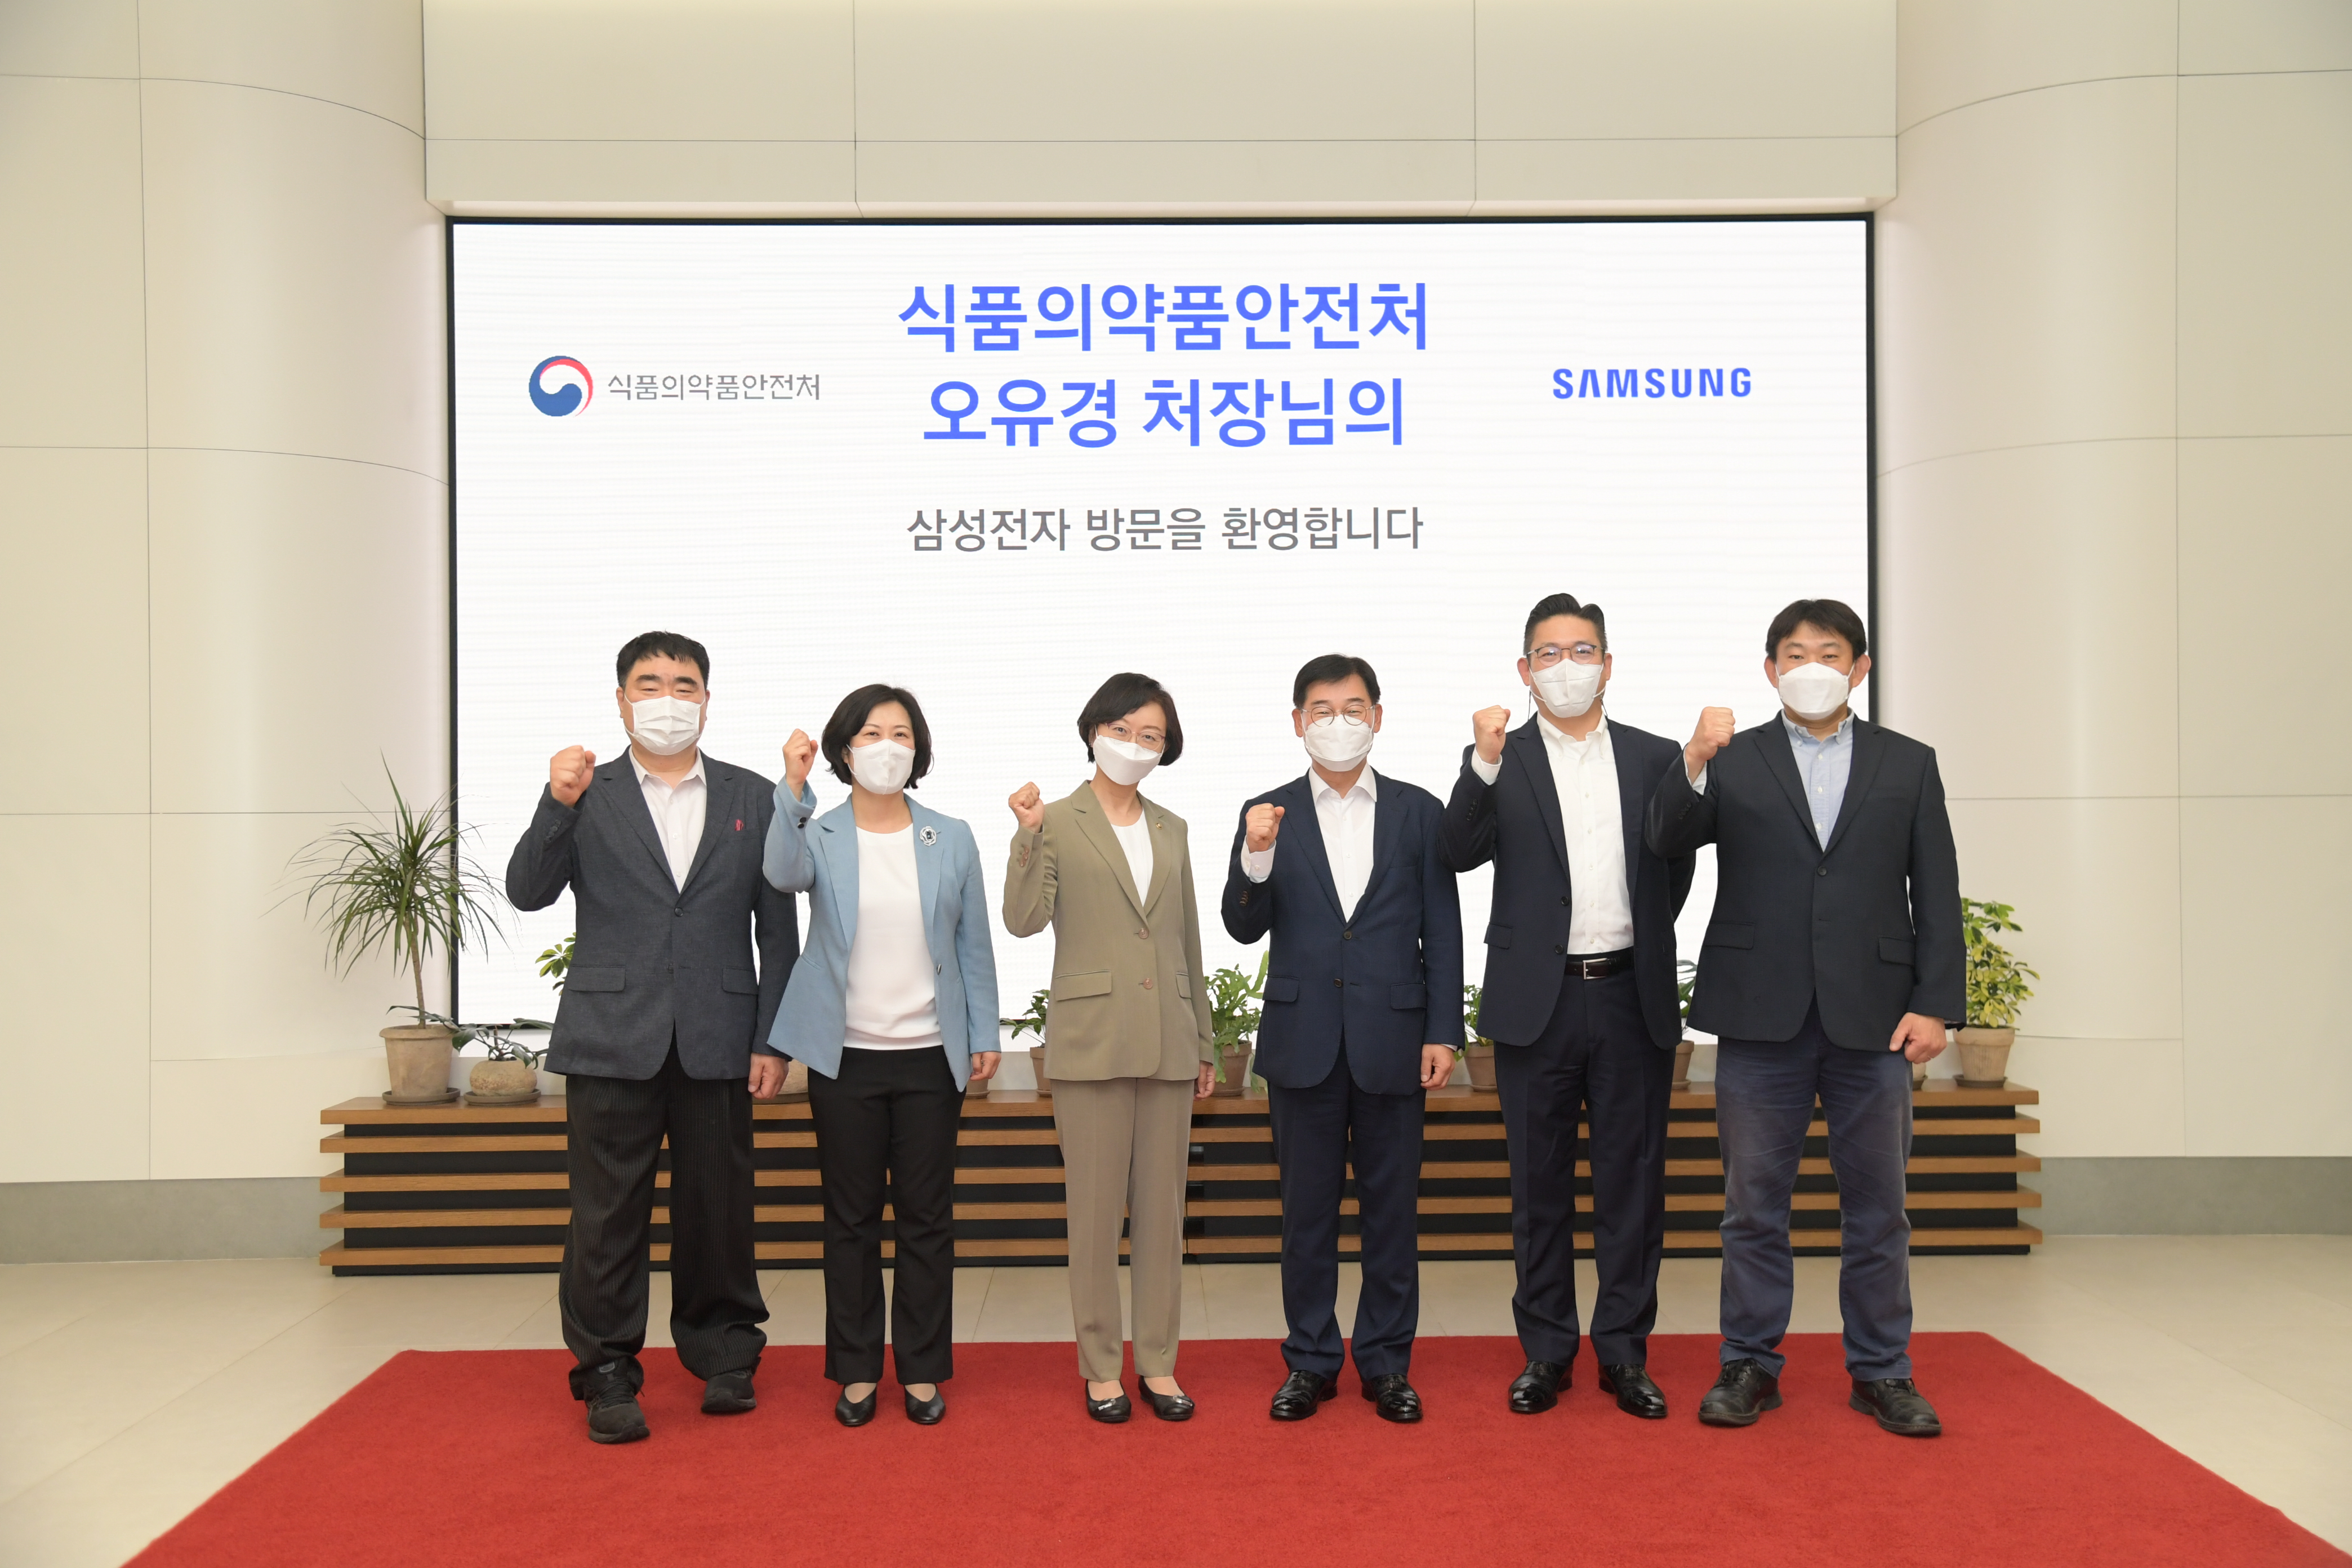 Photo News5 - [July 5, 2022] Minister Visits Digital Medical Device Manufacturing Site